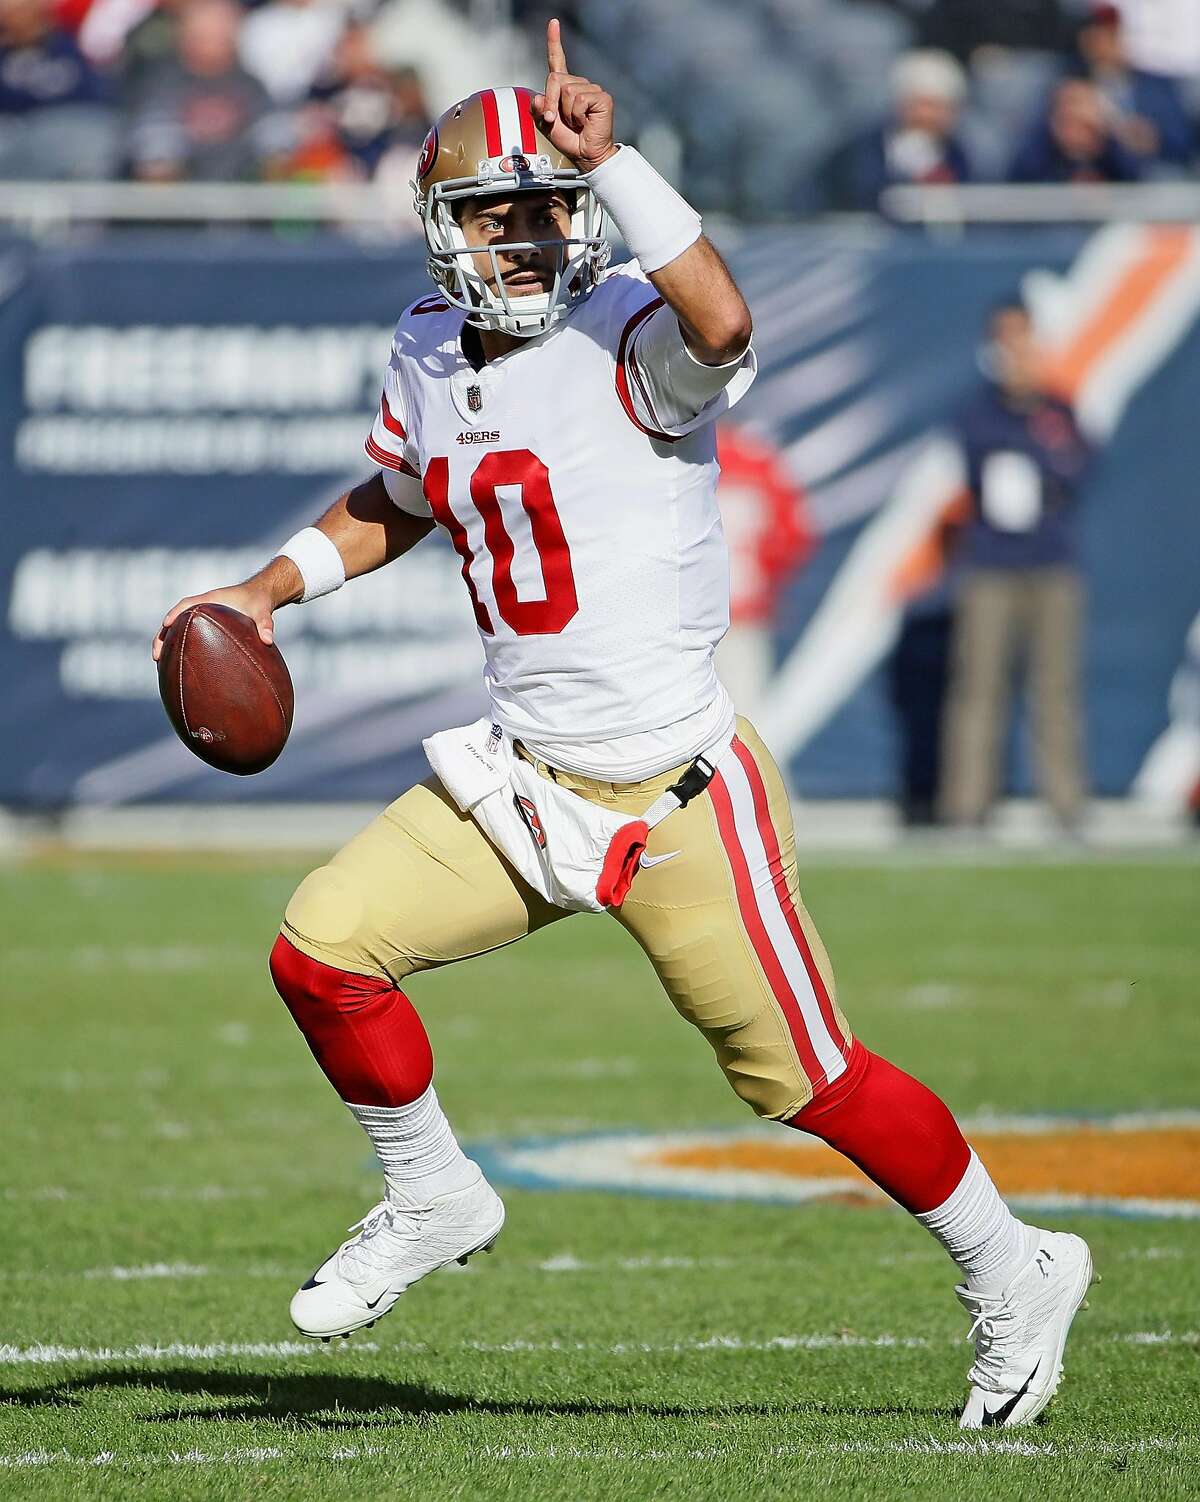 CHICAGO, IL - DECEMBER 03: Jimmy Garoppolo #10 of the San Francisco 49ers rolls out and instructs a receiver agains the Chicago Bears at Soldier Field on December 3, 2017 in Chicago, Illinois. (Photo by Jonathan Daniel/Getty Images)